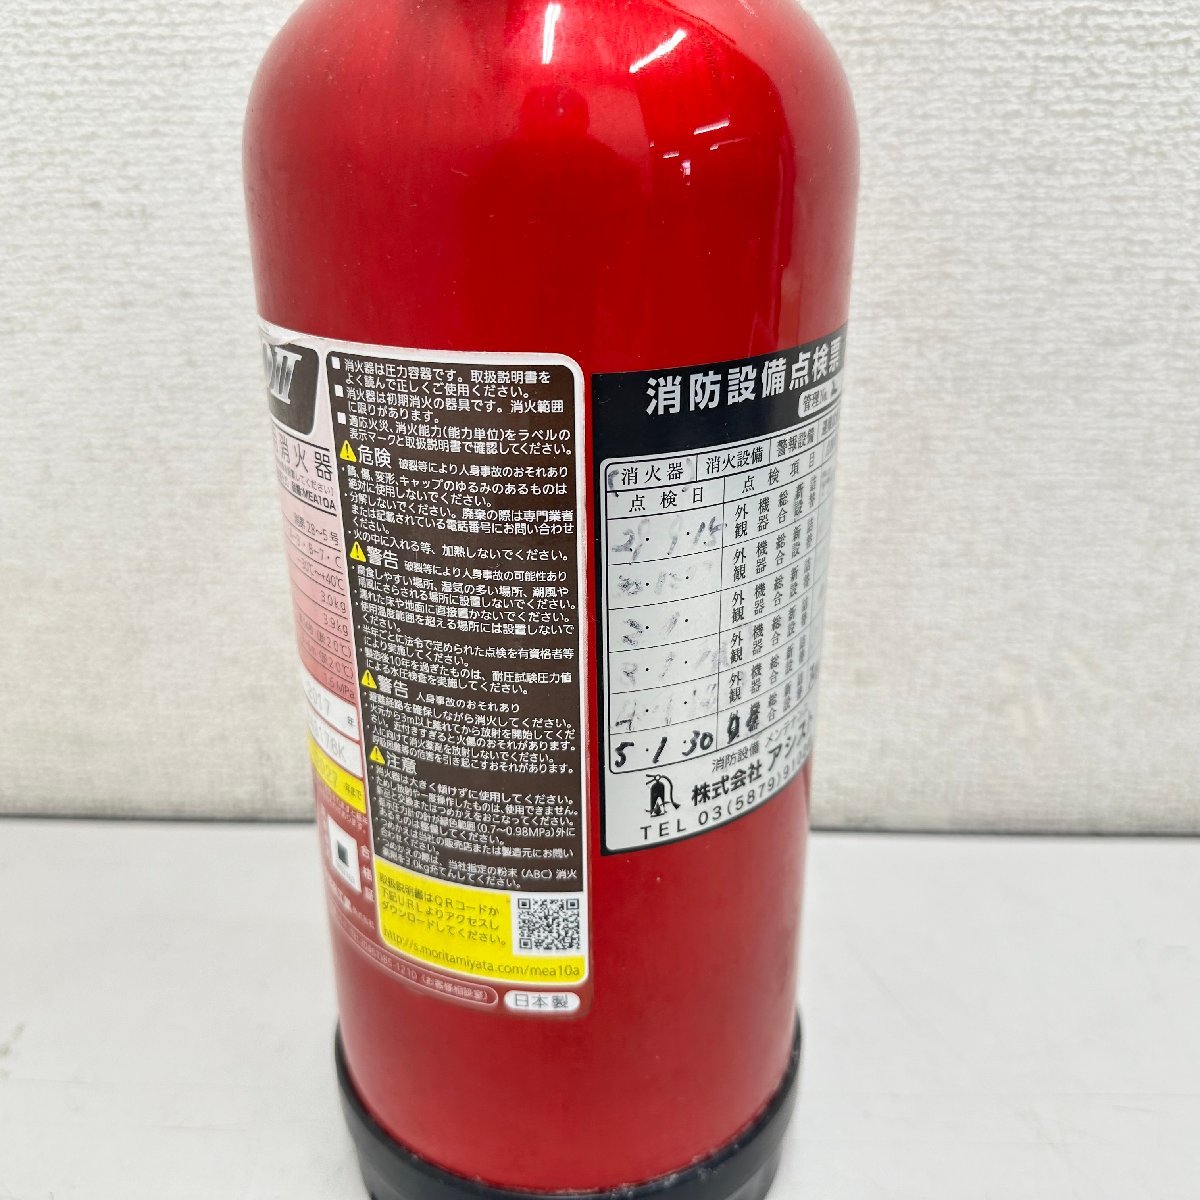 #*[2] Morita . rice field industry ALTESIMOⅡ arte simoⅡ business use fire extinguisher use time limit 2027 year 6/012202a*#